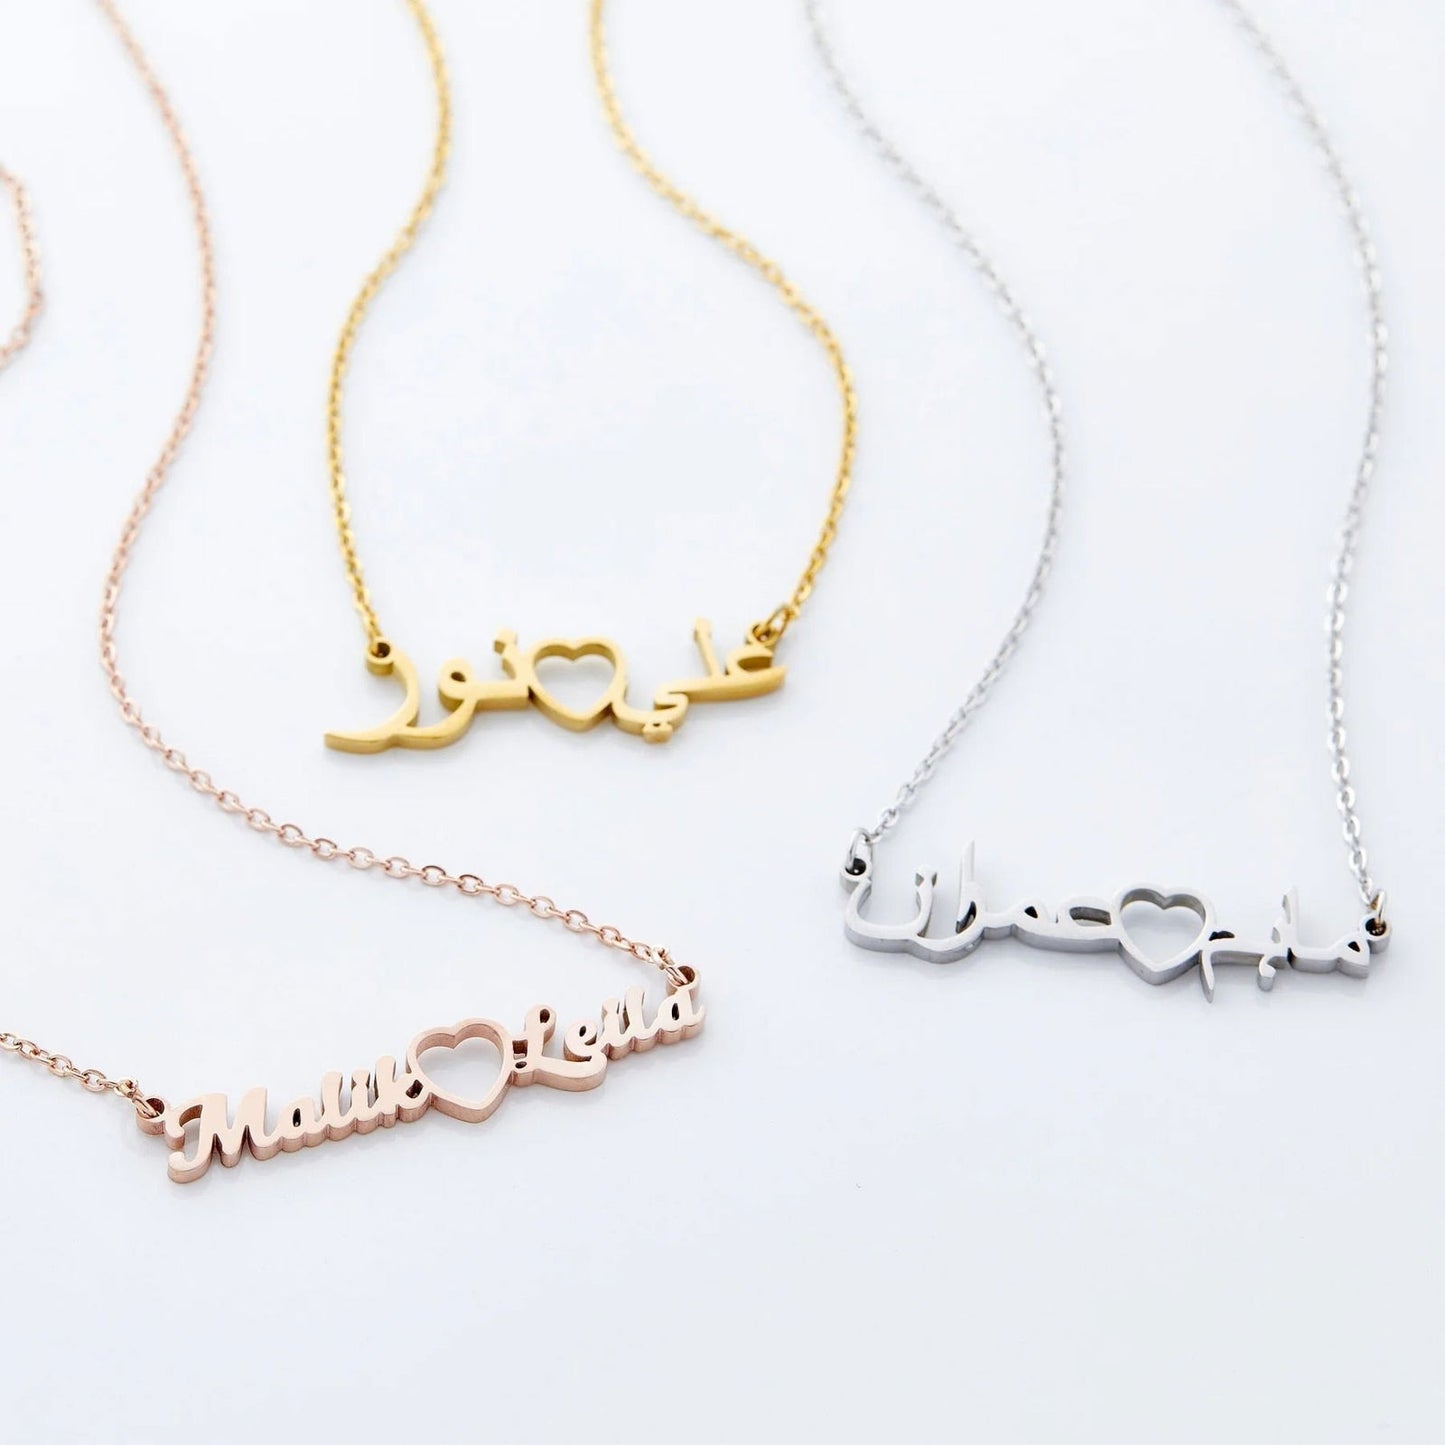 Two Name And Heart Personalized Arabic Necklace - Arabic Name Jewellery